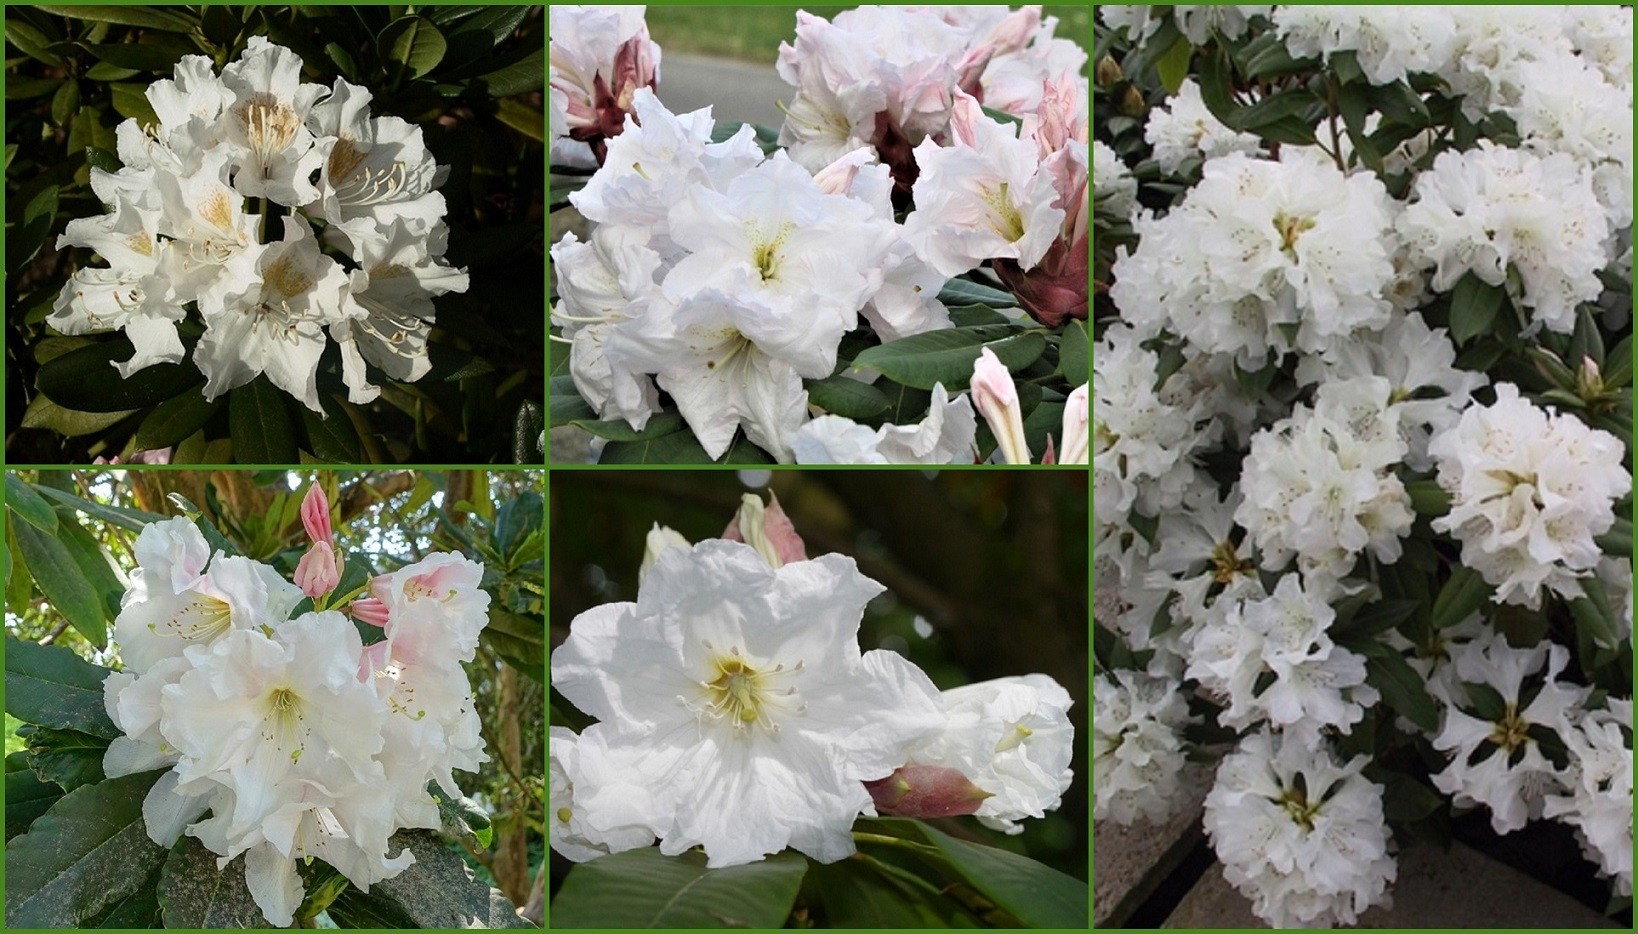 The collection of 5 white Rhododendrons